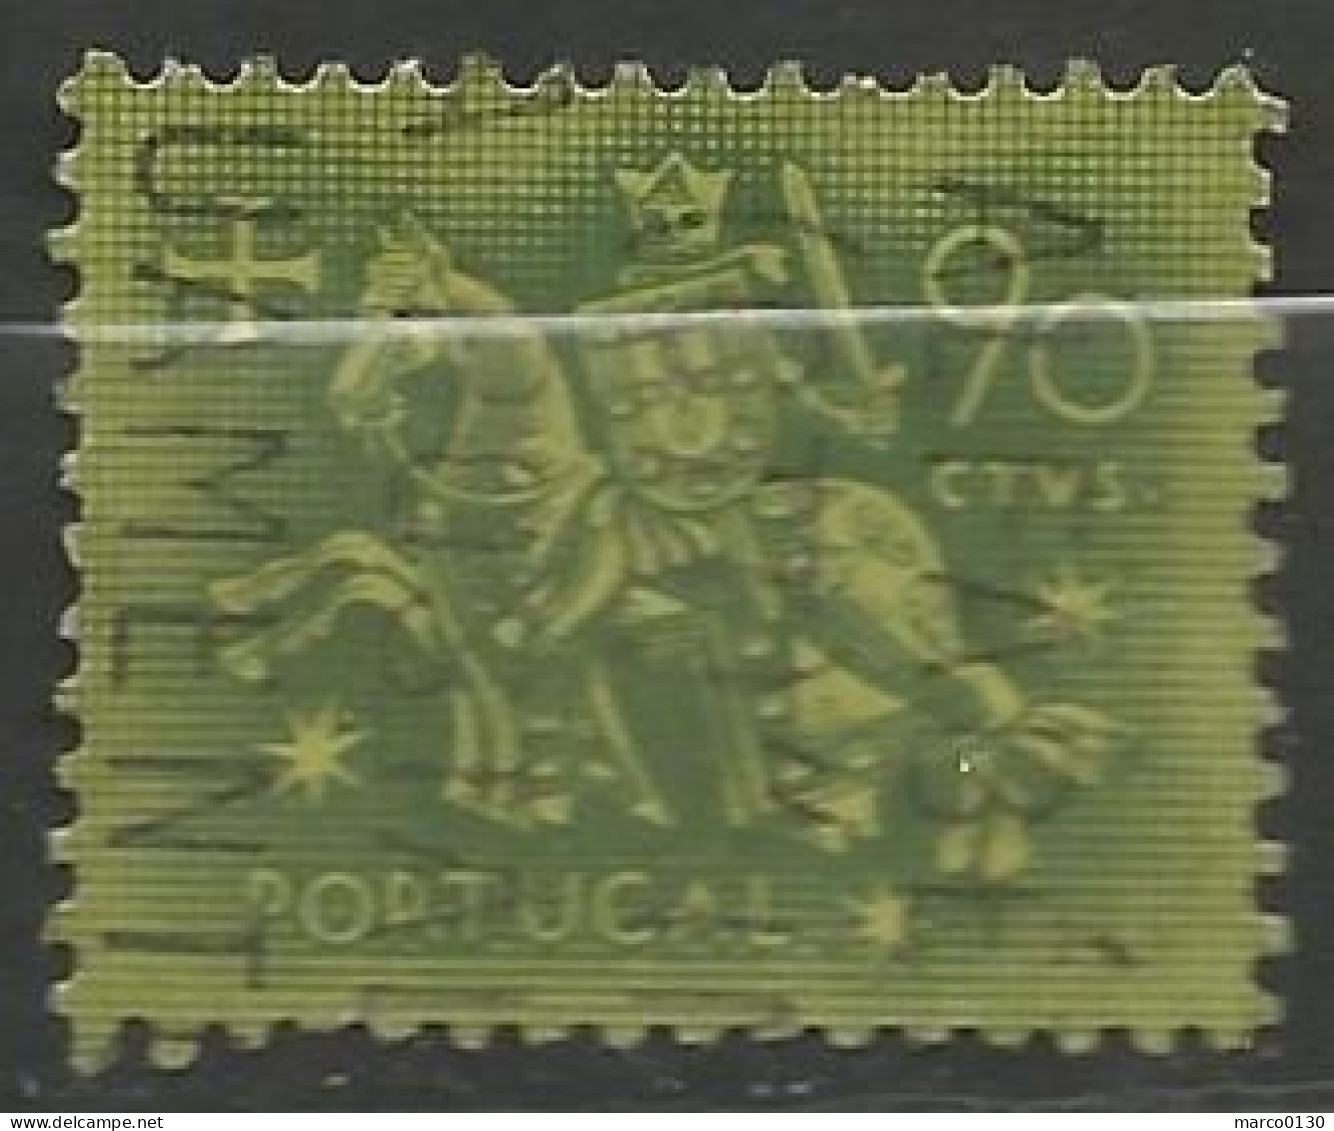 PORTUGAL N° 778 OBLITERE - Used Stamps